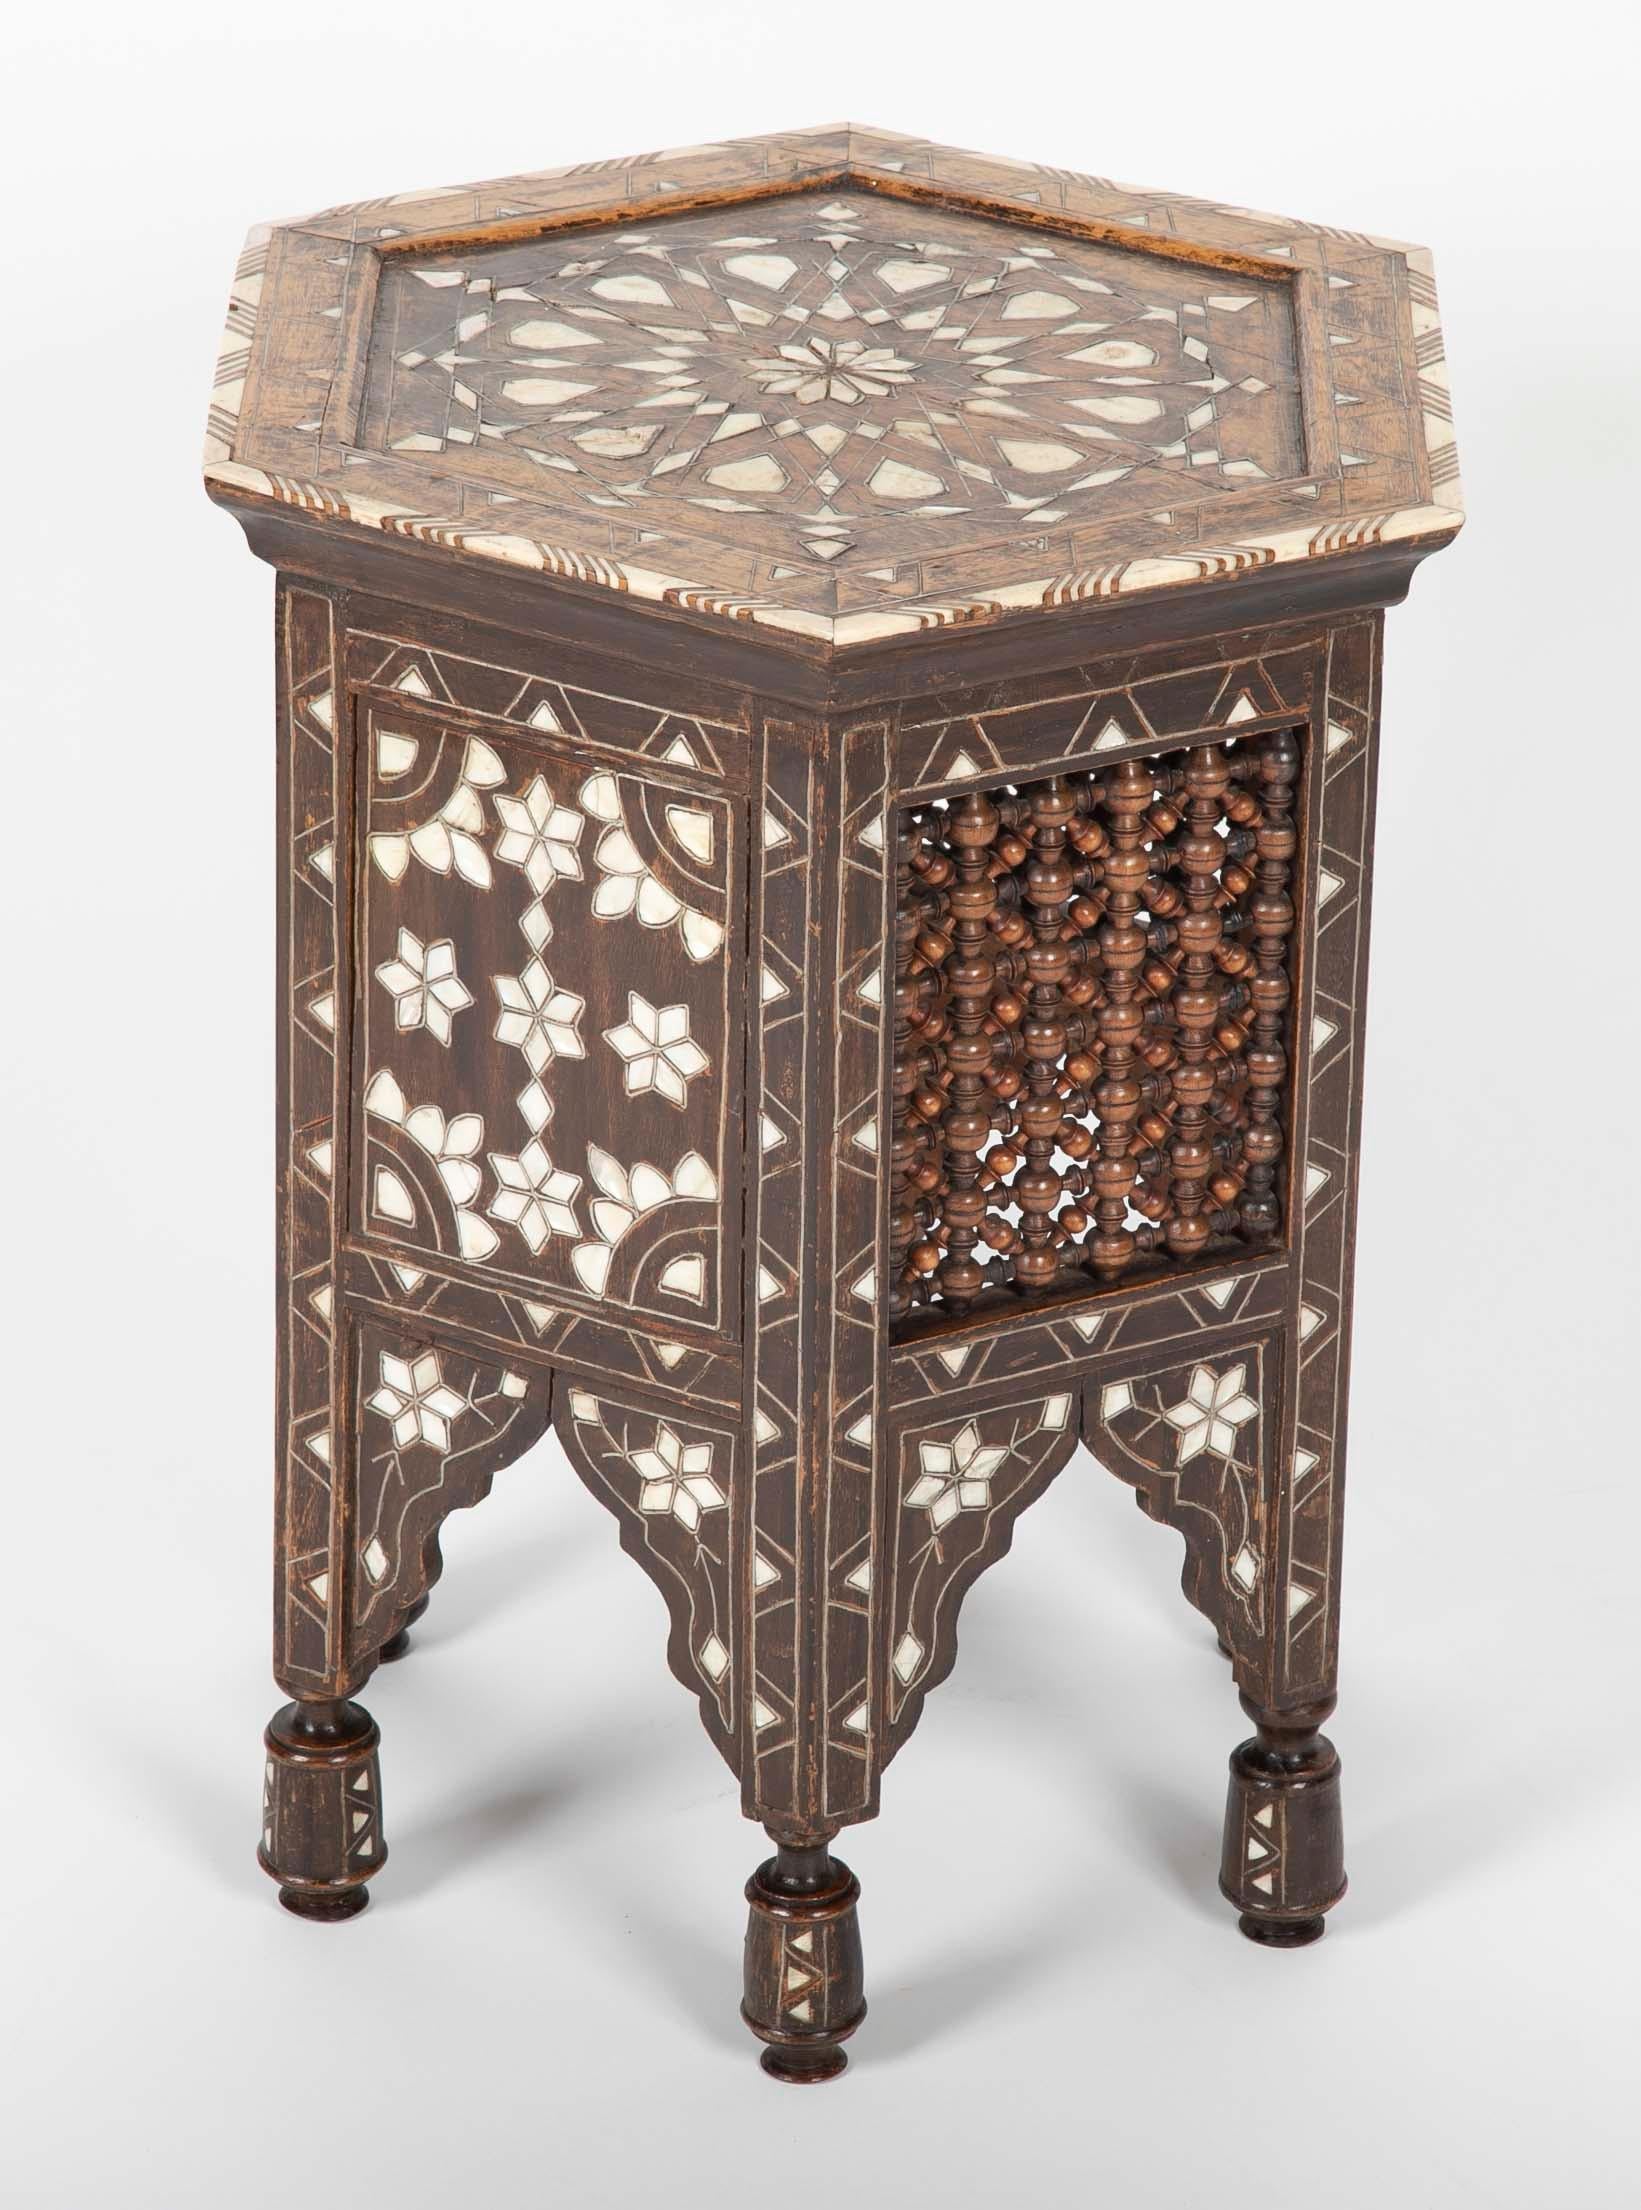 A Turkish hexagonal hardwood side table with bone, metal and mother-of-pearl inlay throughout. This handsome table has alternating side panels of inlay and the delicate wood turnings that make this type of furniture so distinctive.